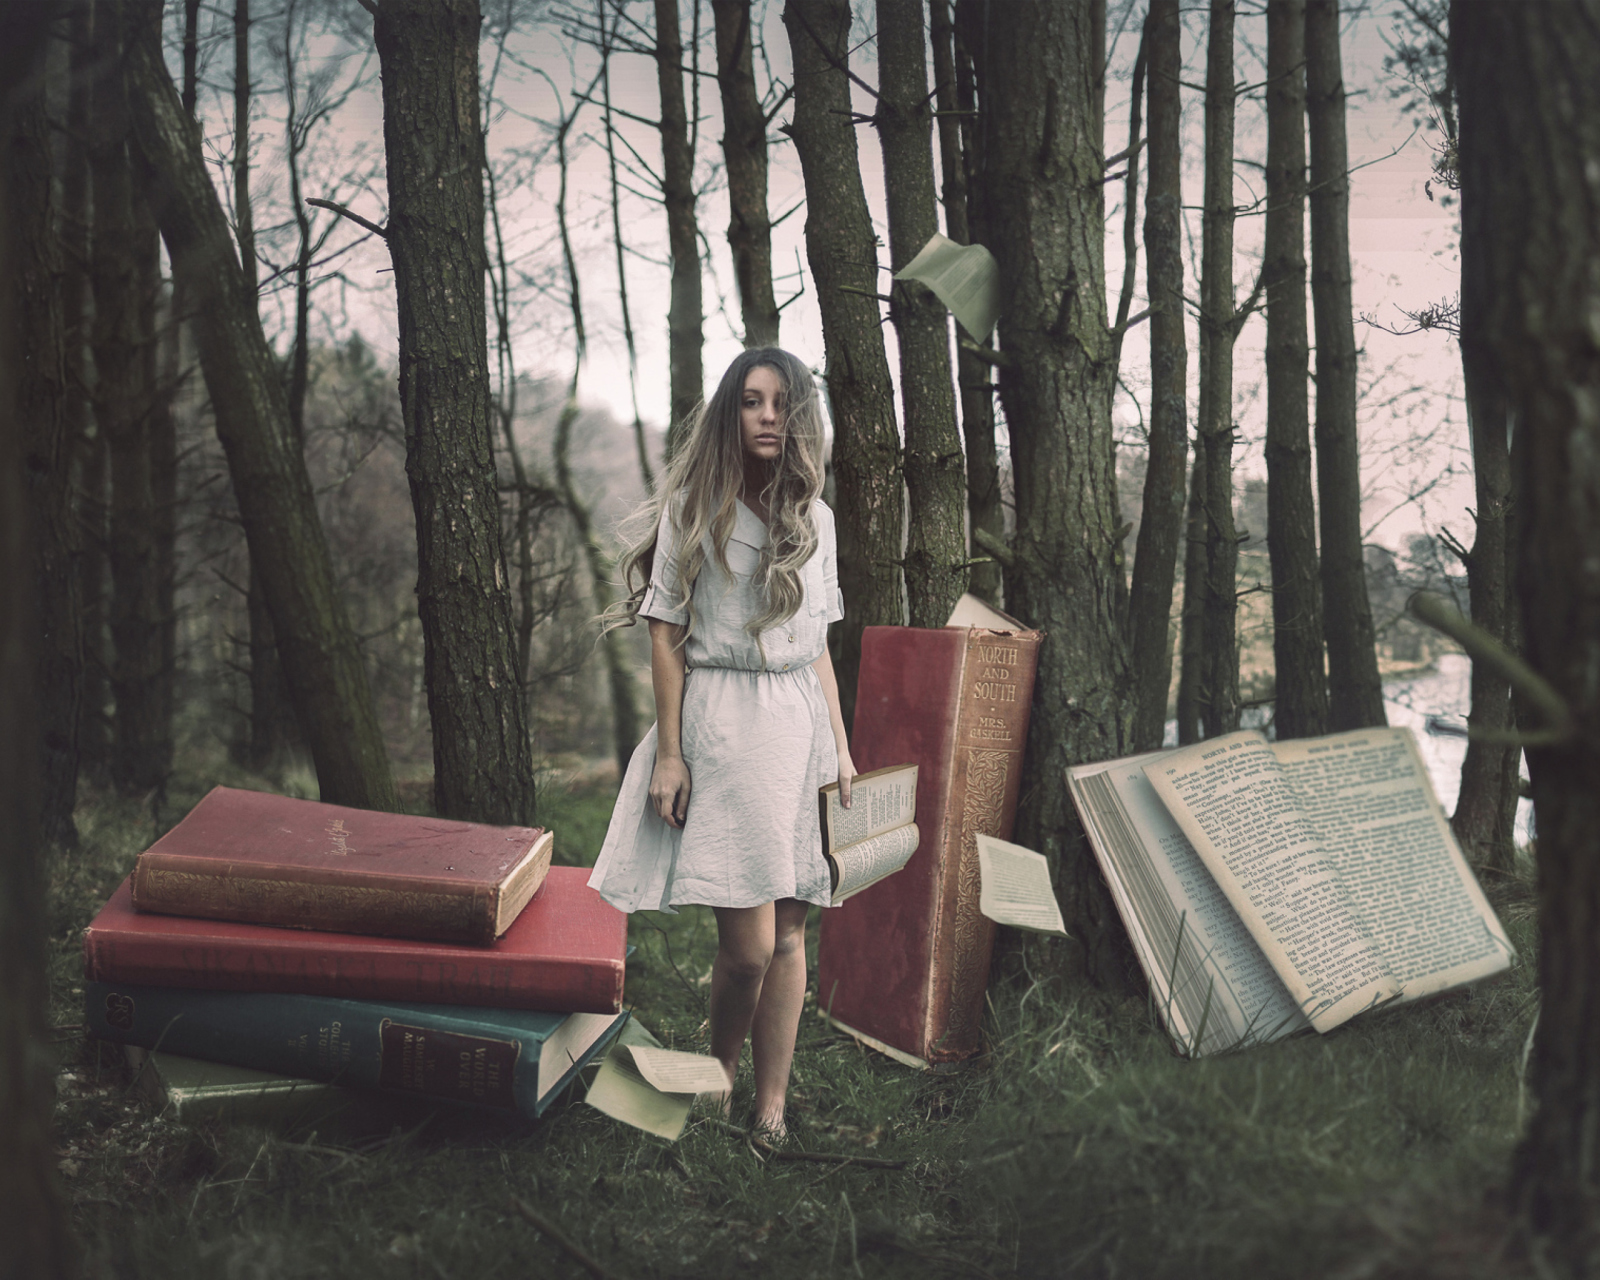 Forest Nymph Surrounded By Books wallpaper 1600x1280